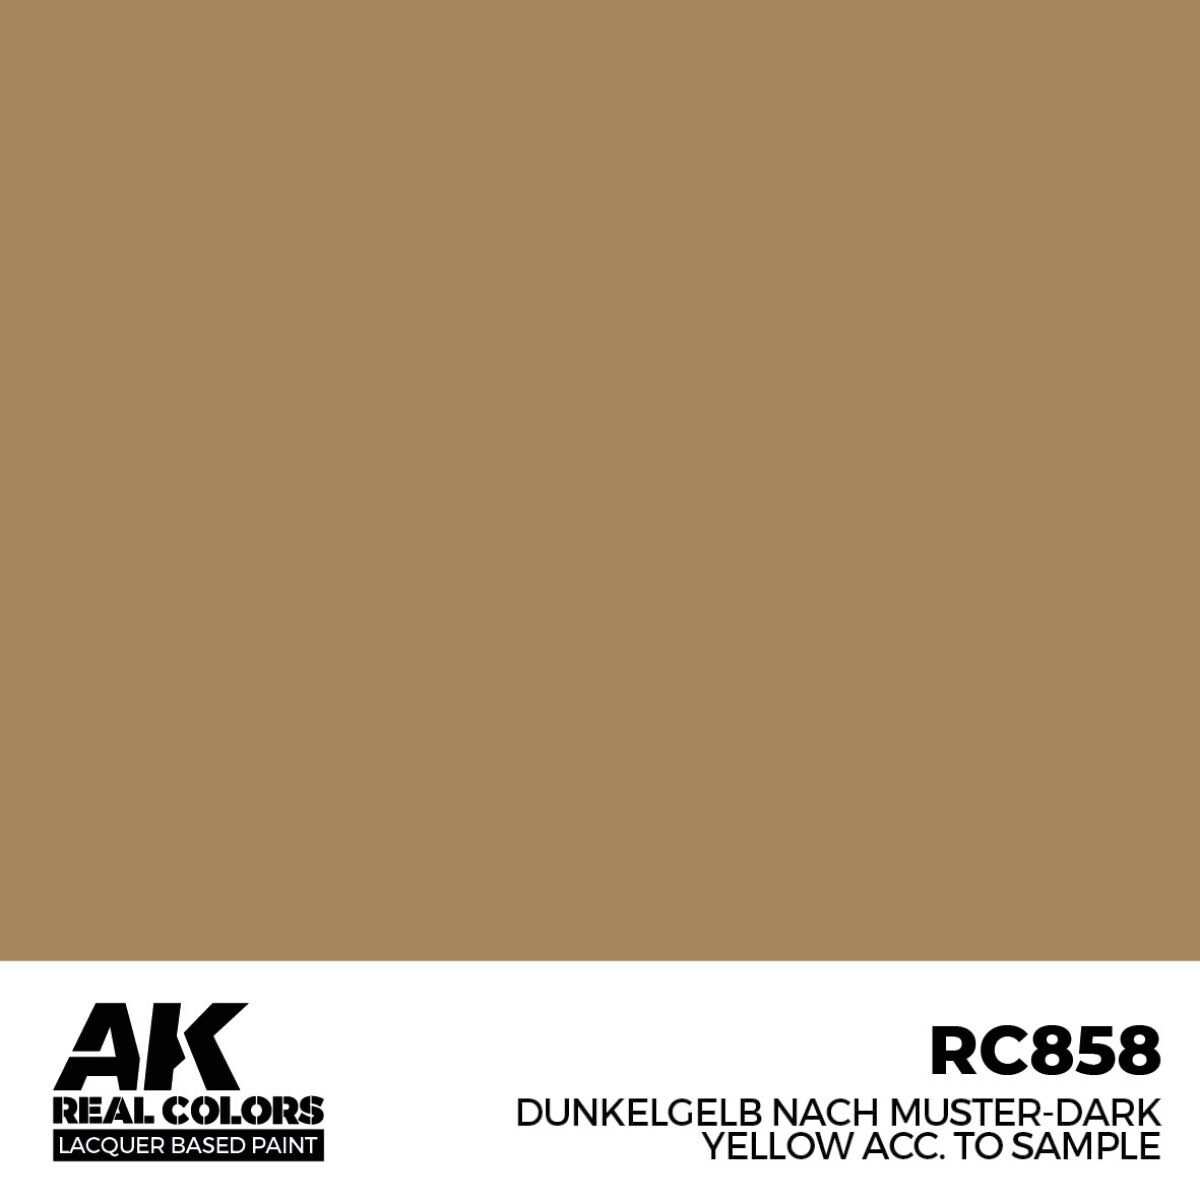 AK RC858 Real Colors Dunkelgelb Nach Muster-Dark Yellow acc. to Sample